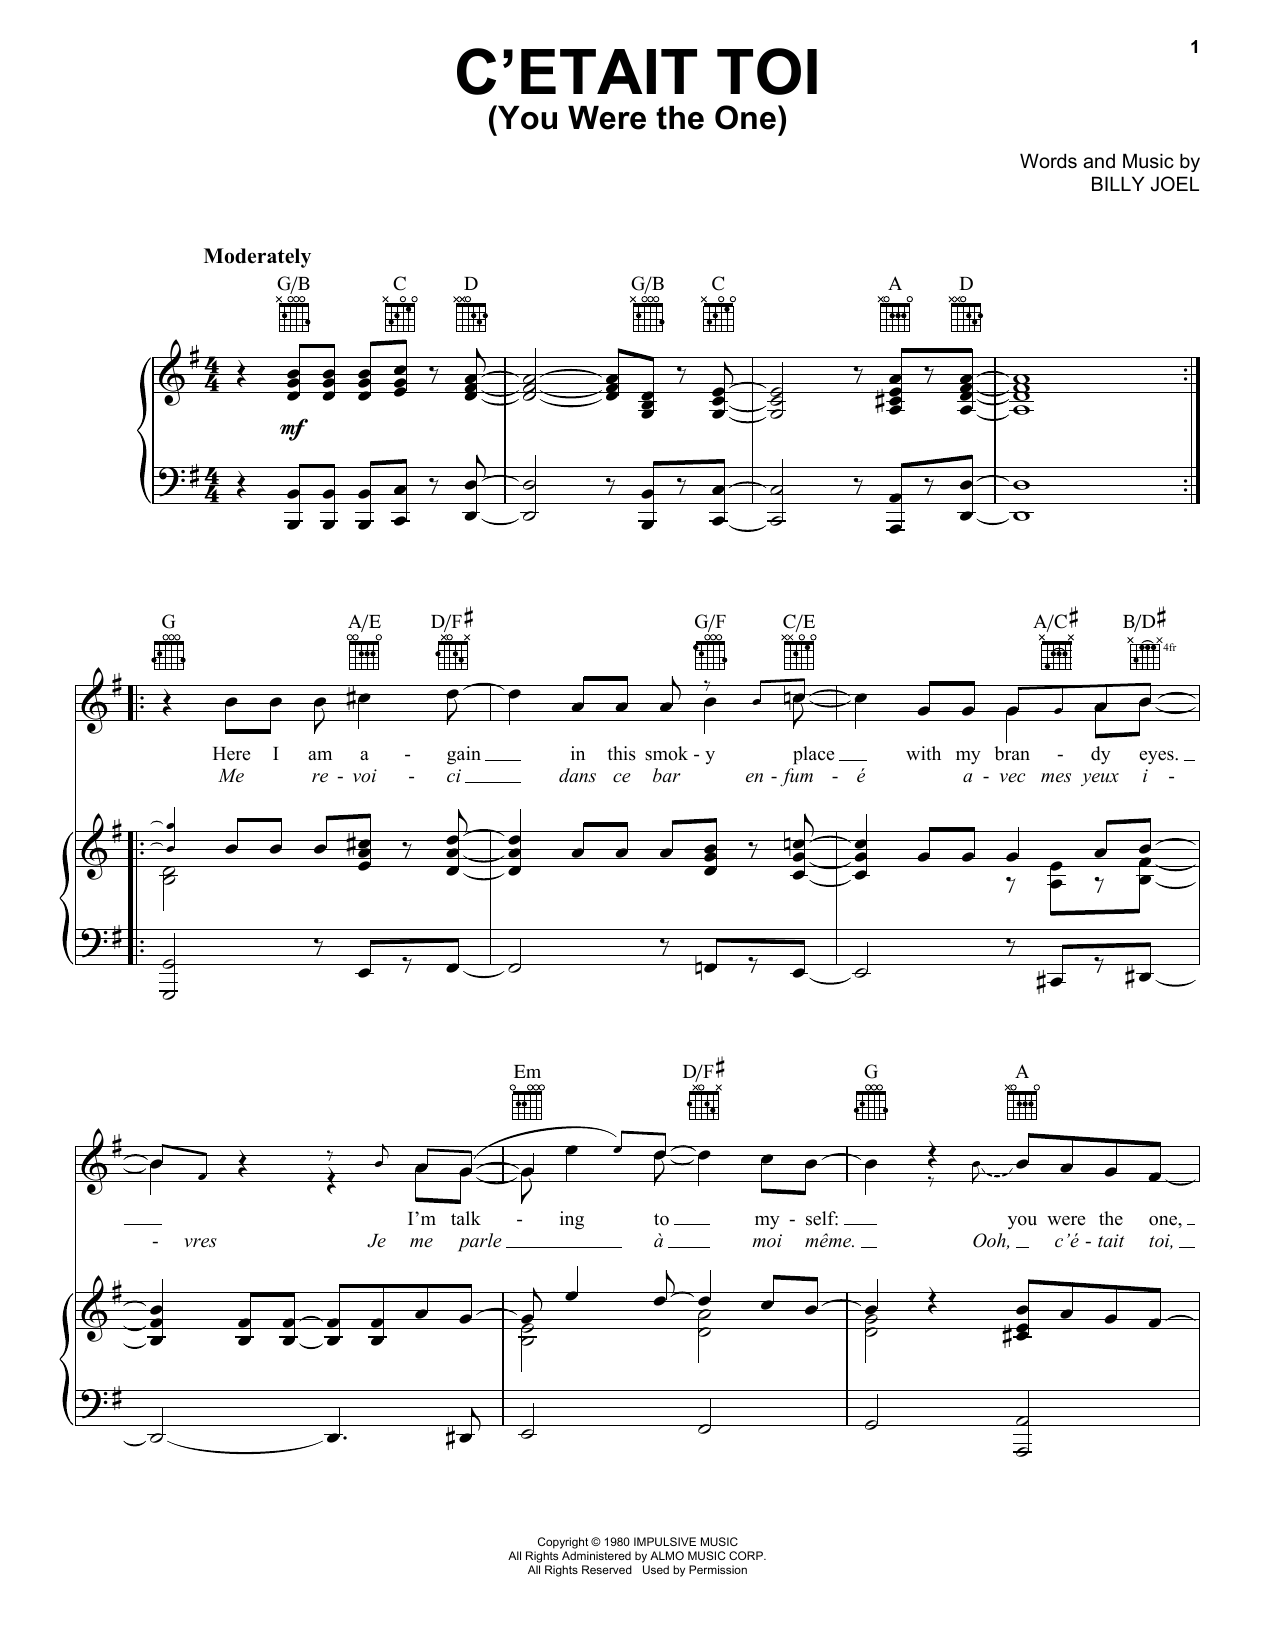 Download Billy Joel C'etait toi (You Were The One) Sheet Music